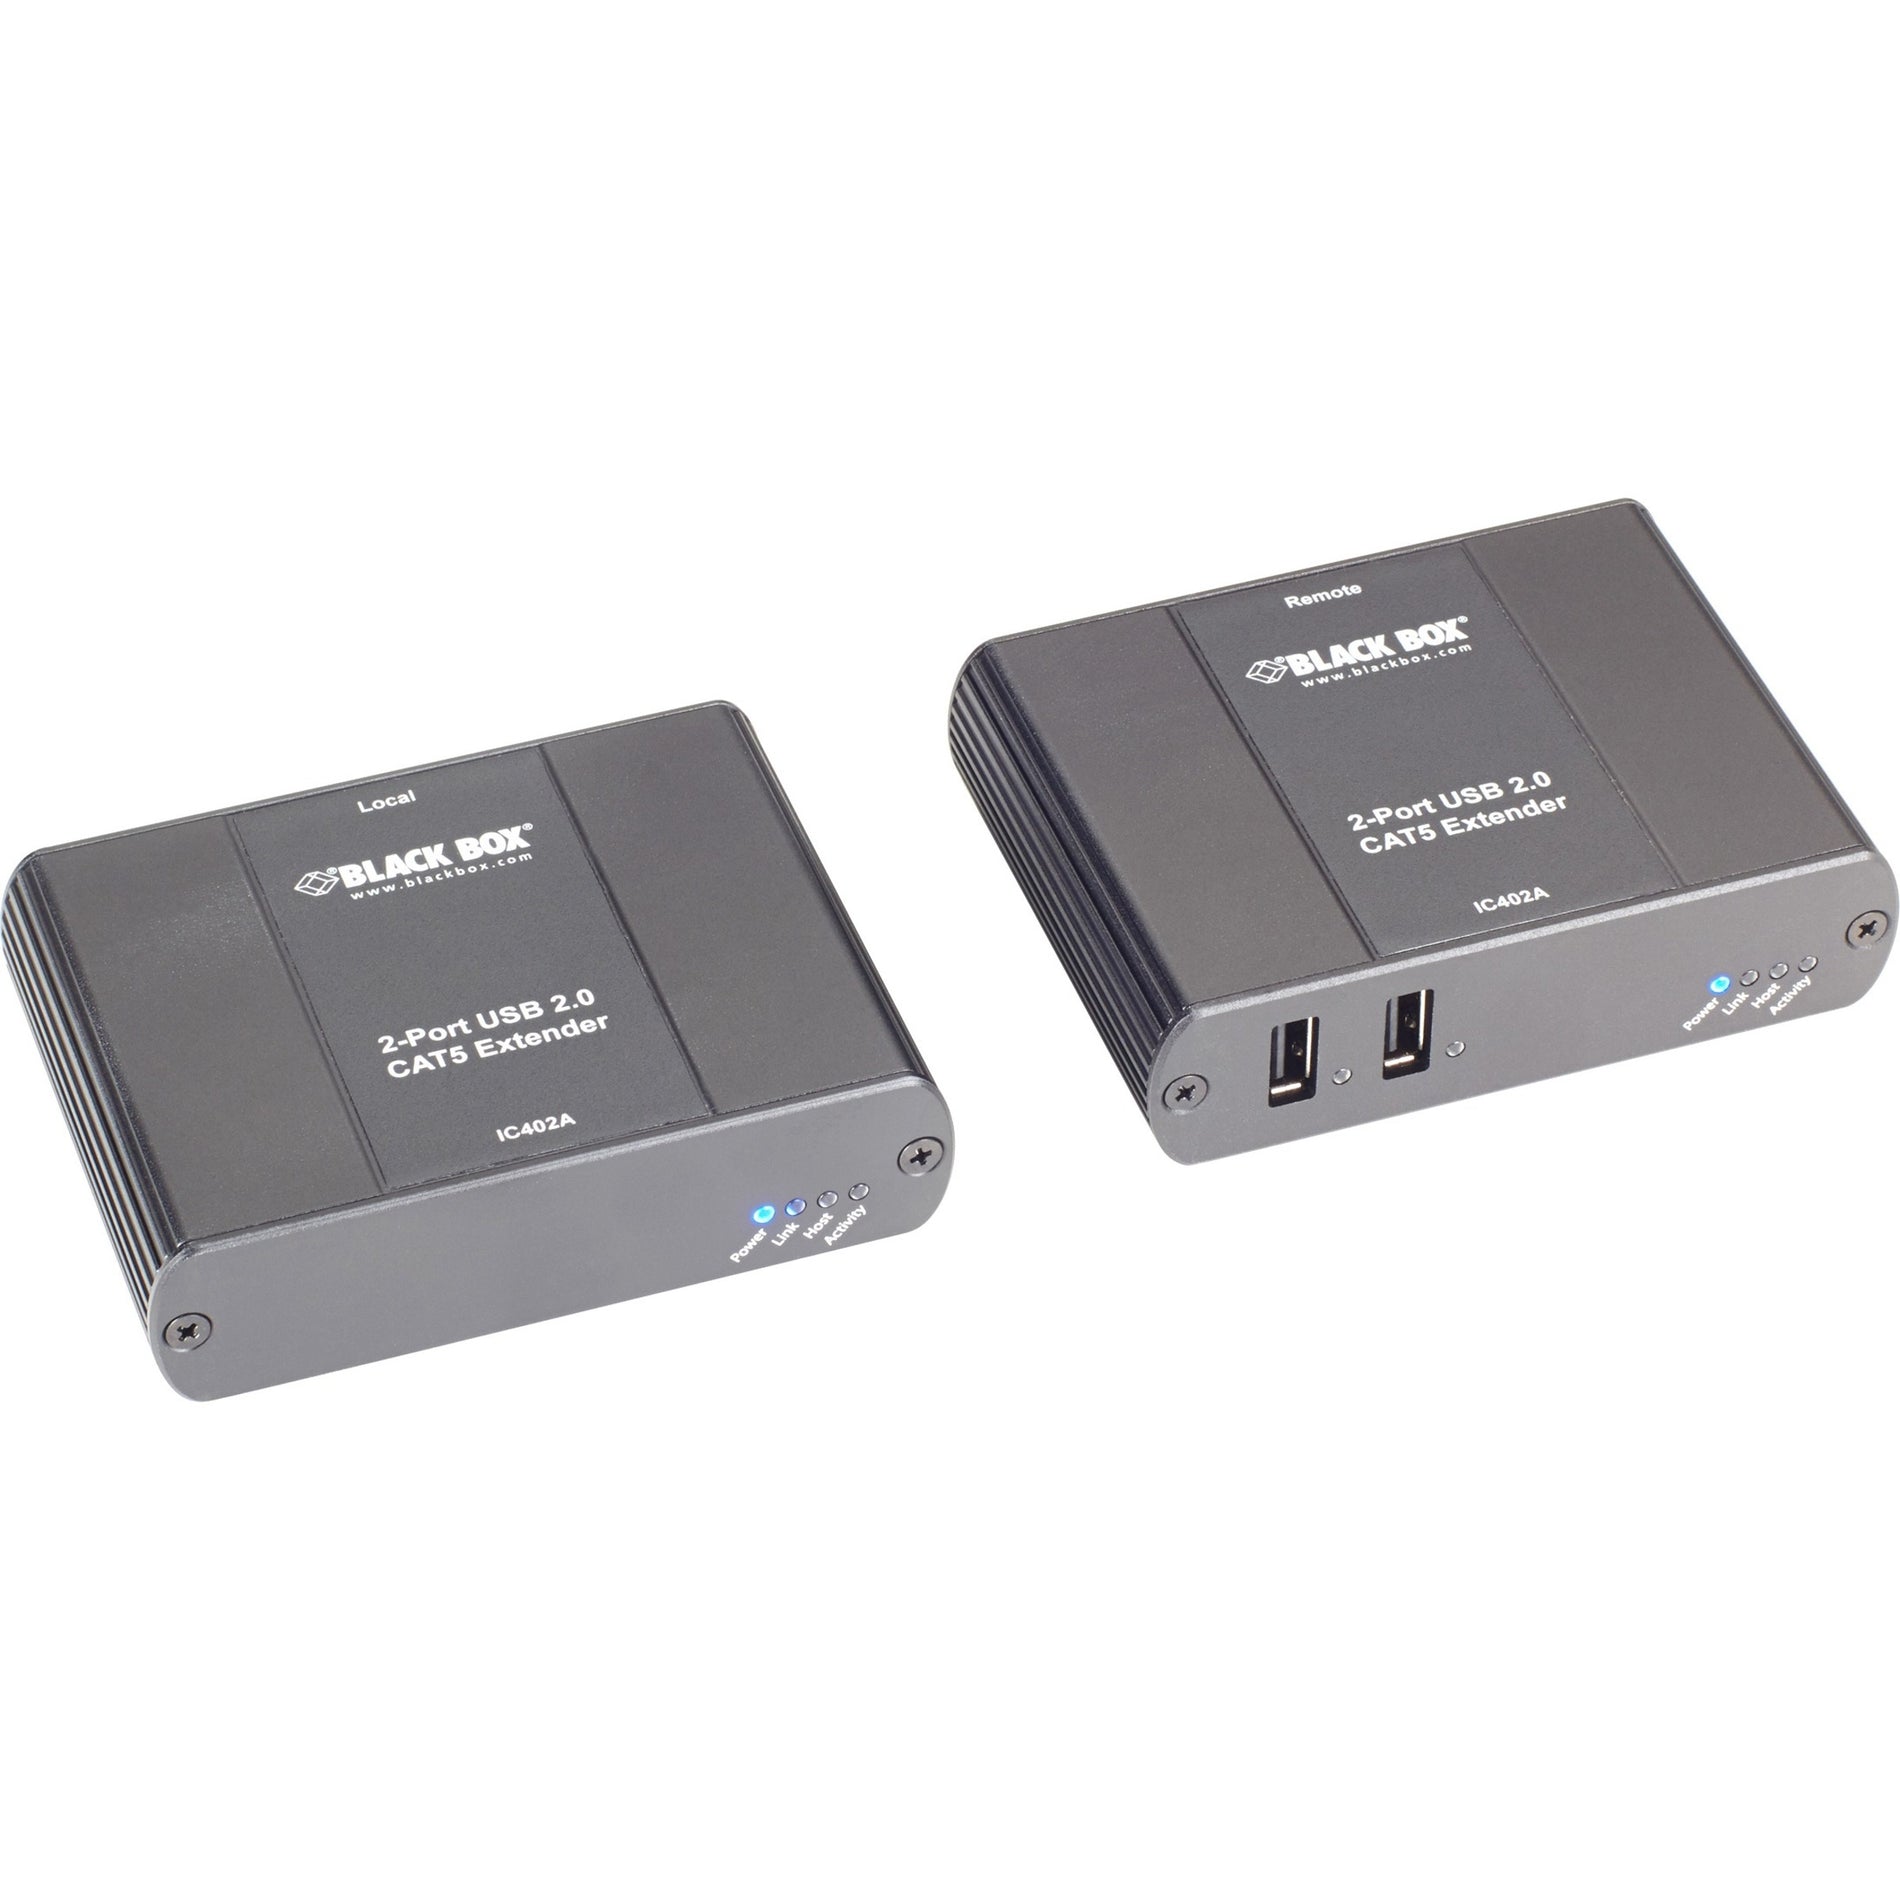 Black Box IC402A-R2 CATx USB 2.0 Extender - 2-Port, Extend USB Connections up to 328.08 ft